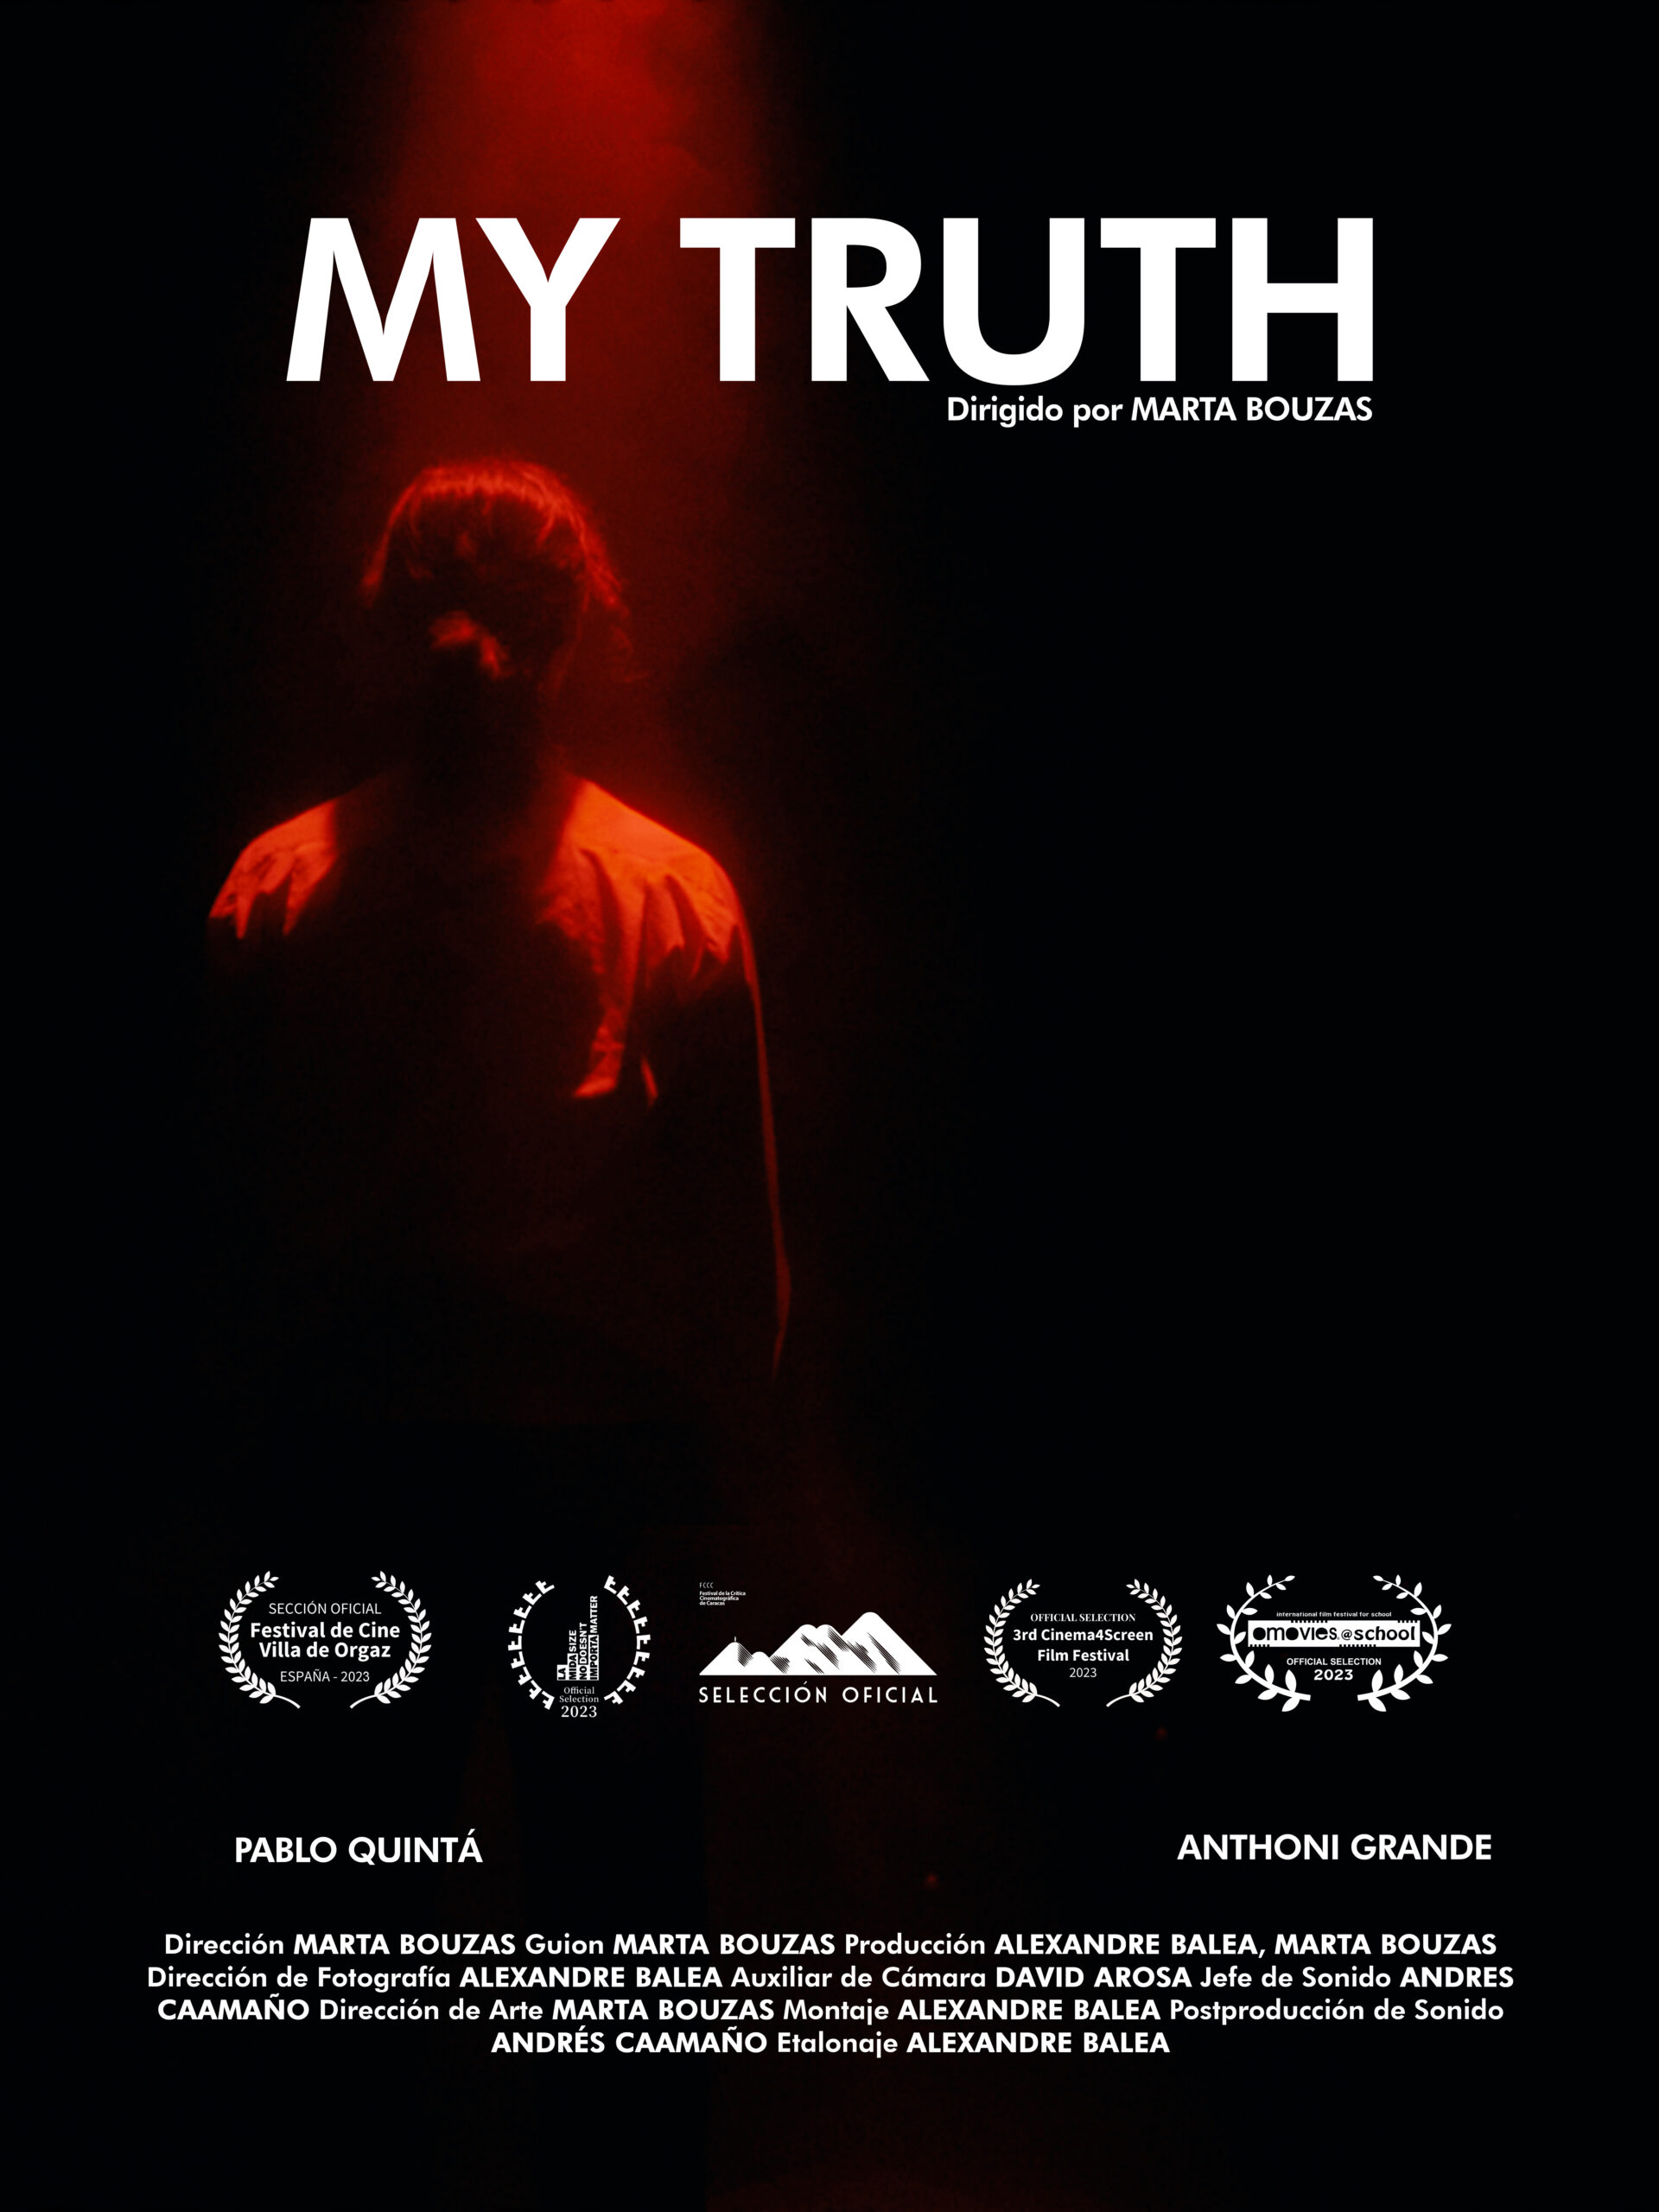 OFFICIAL SELECTION: MY TRUTH